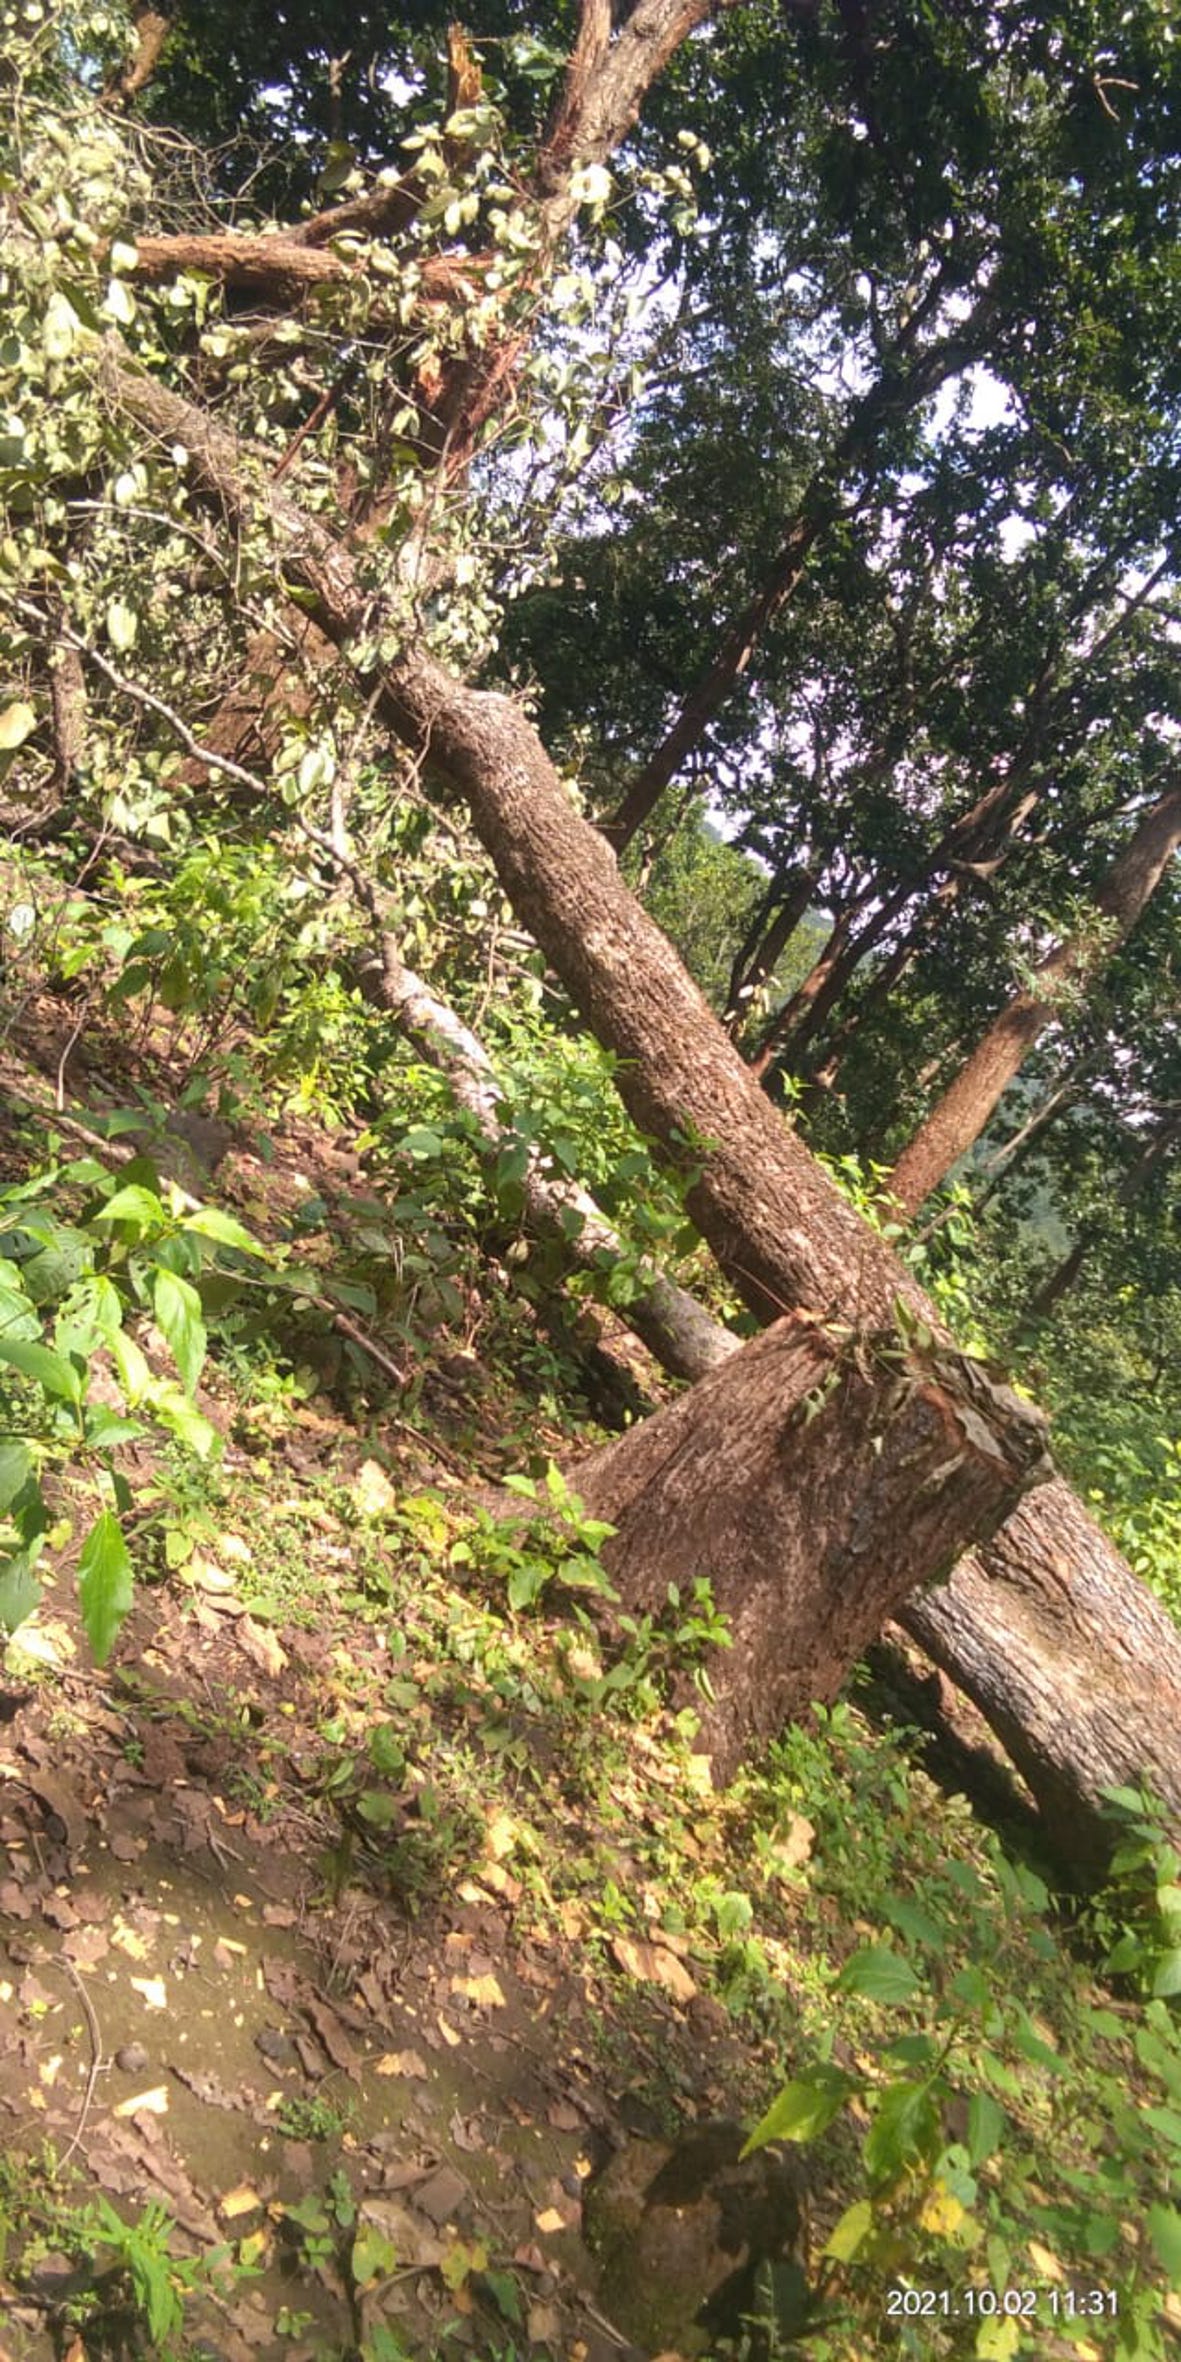 Department removed sight, illegal felling of forests started